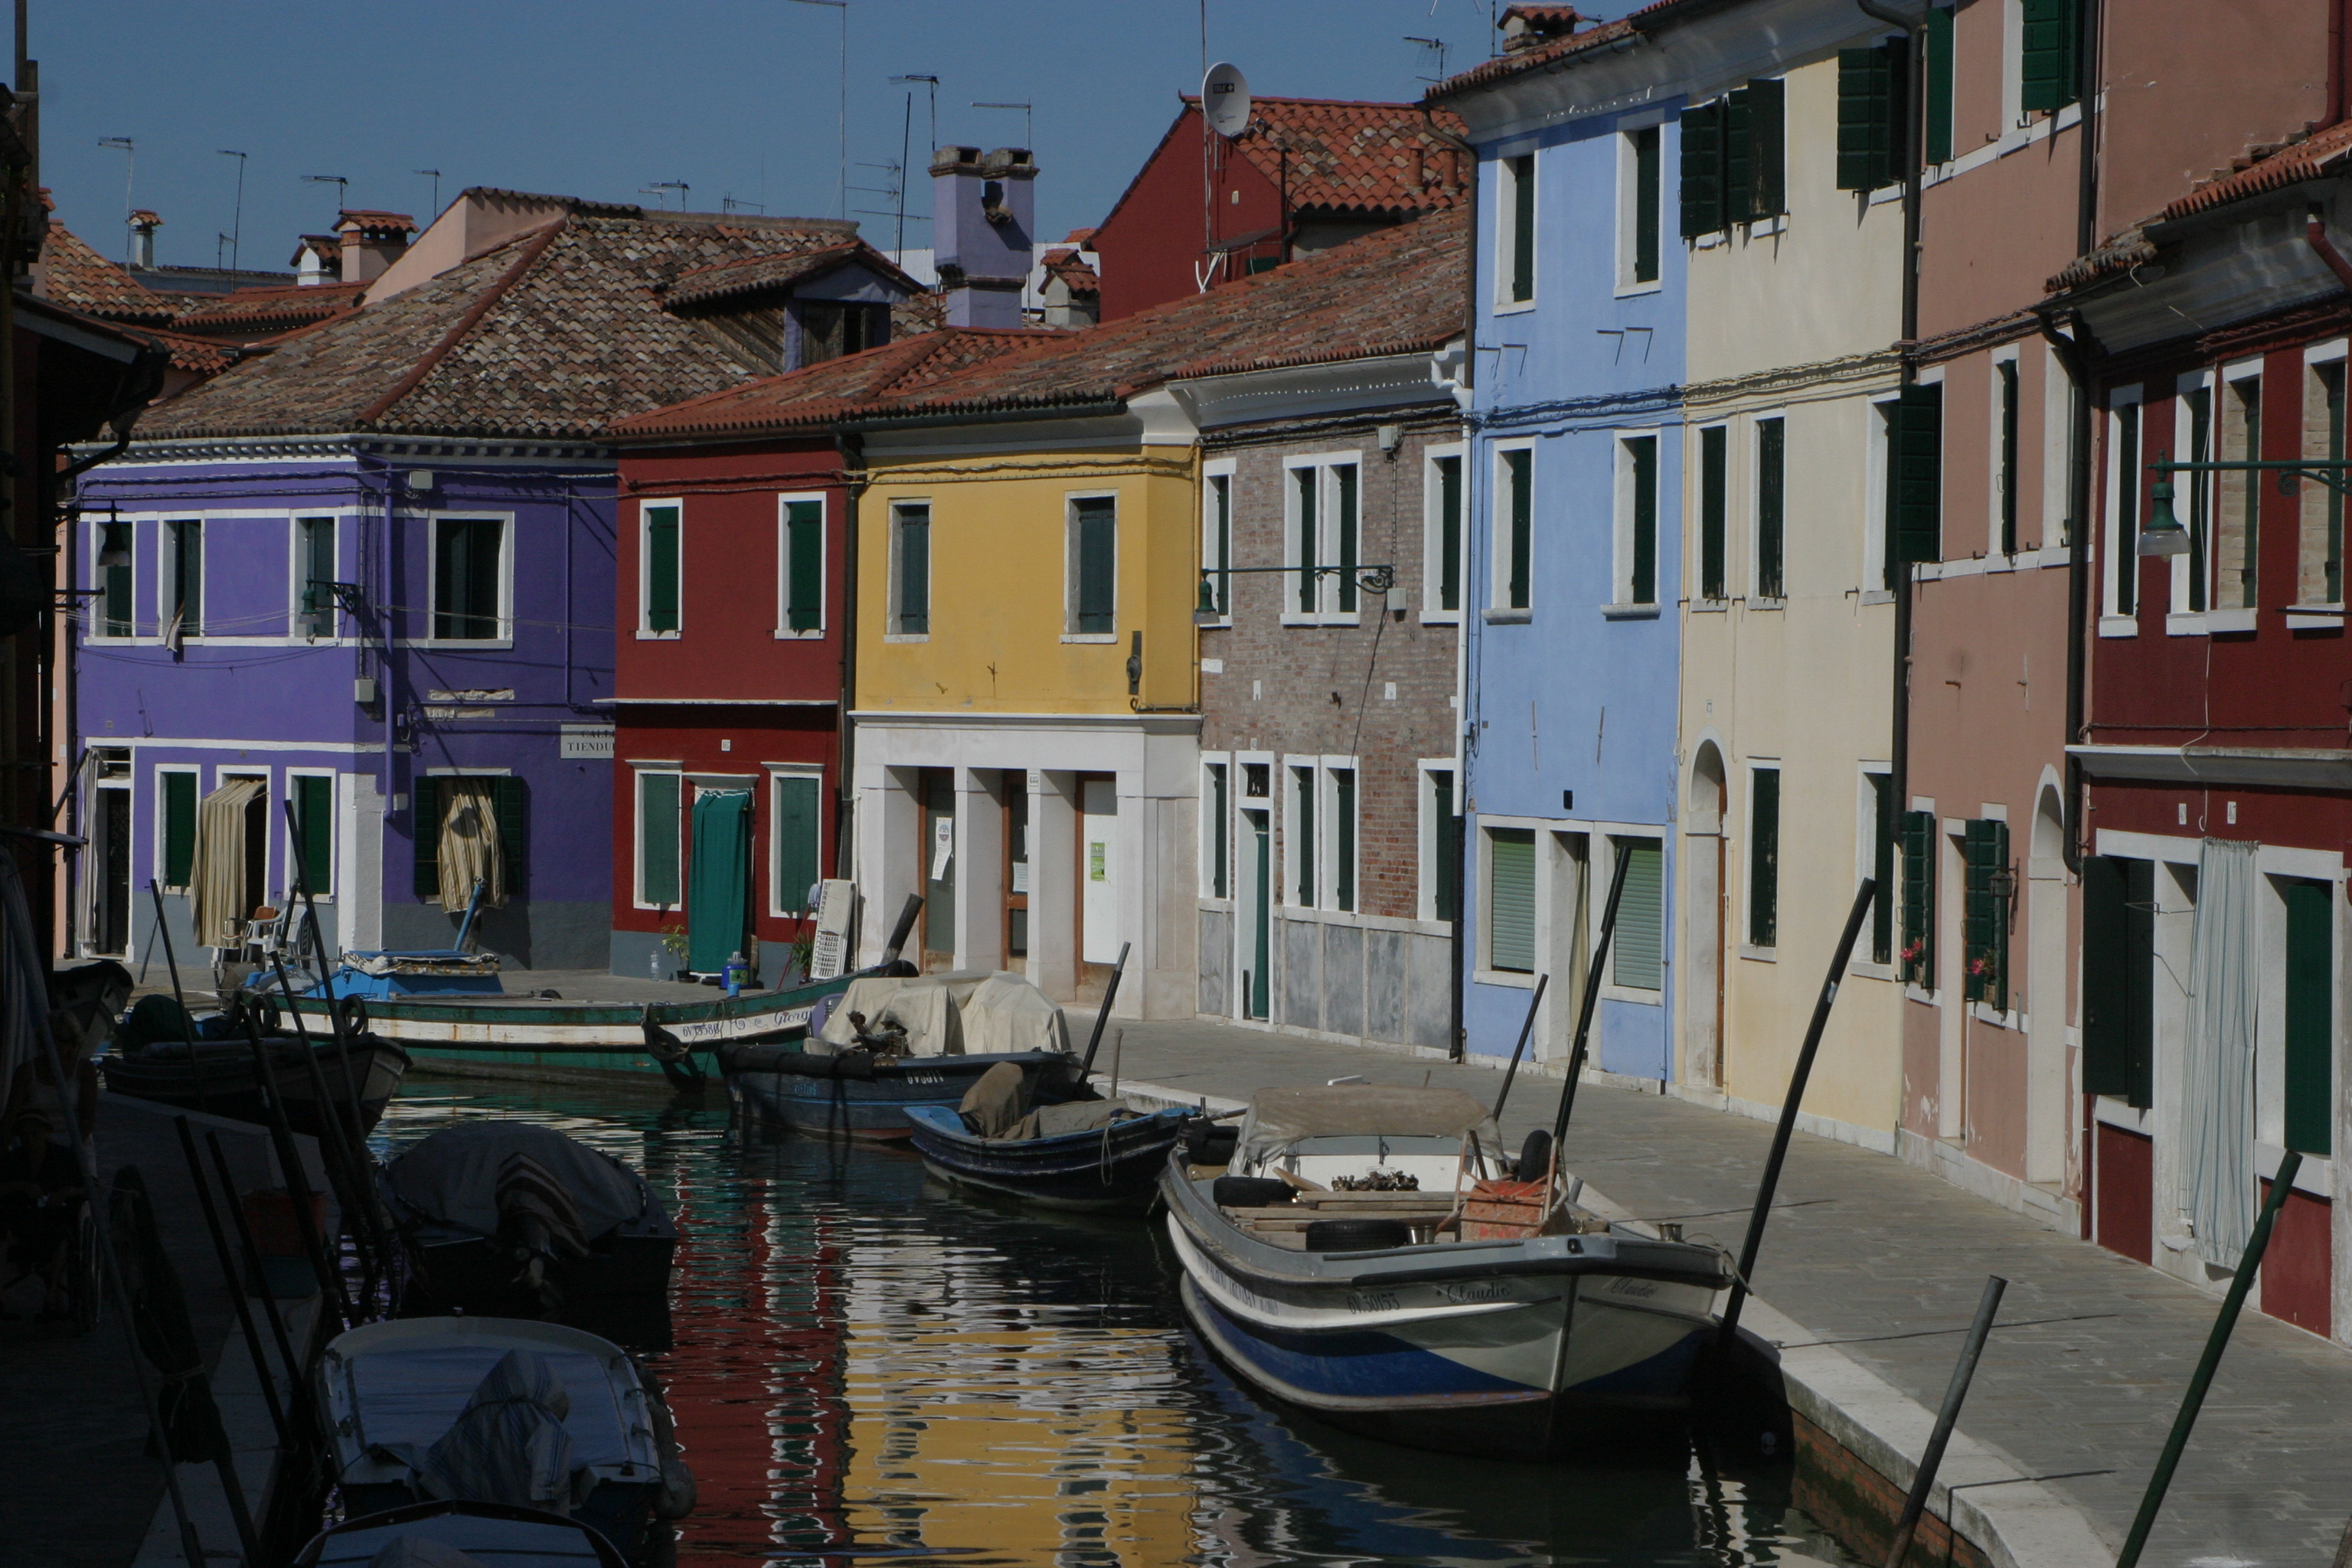 Colorful buildings on the island of Burano